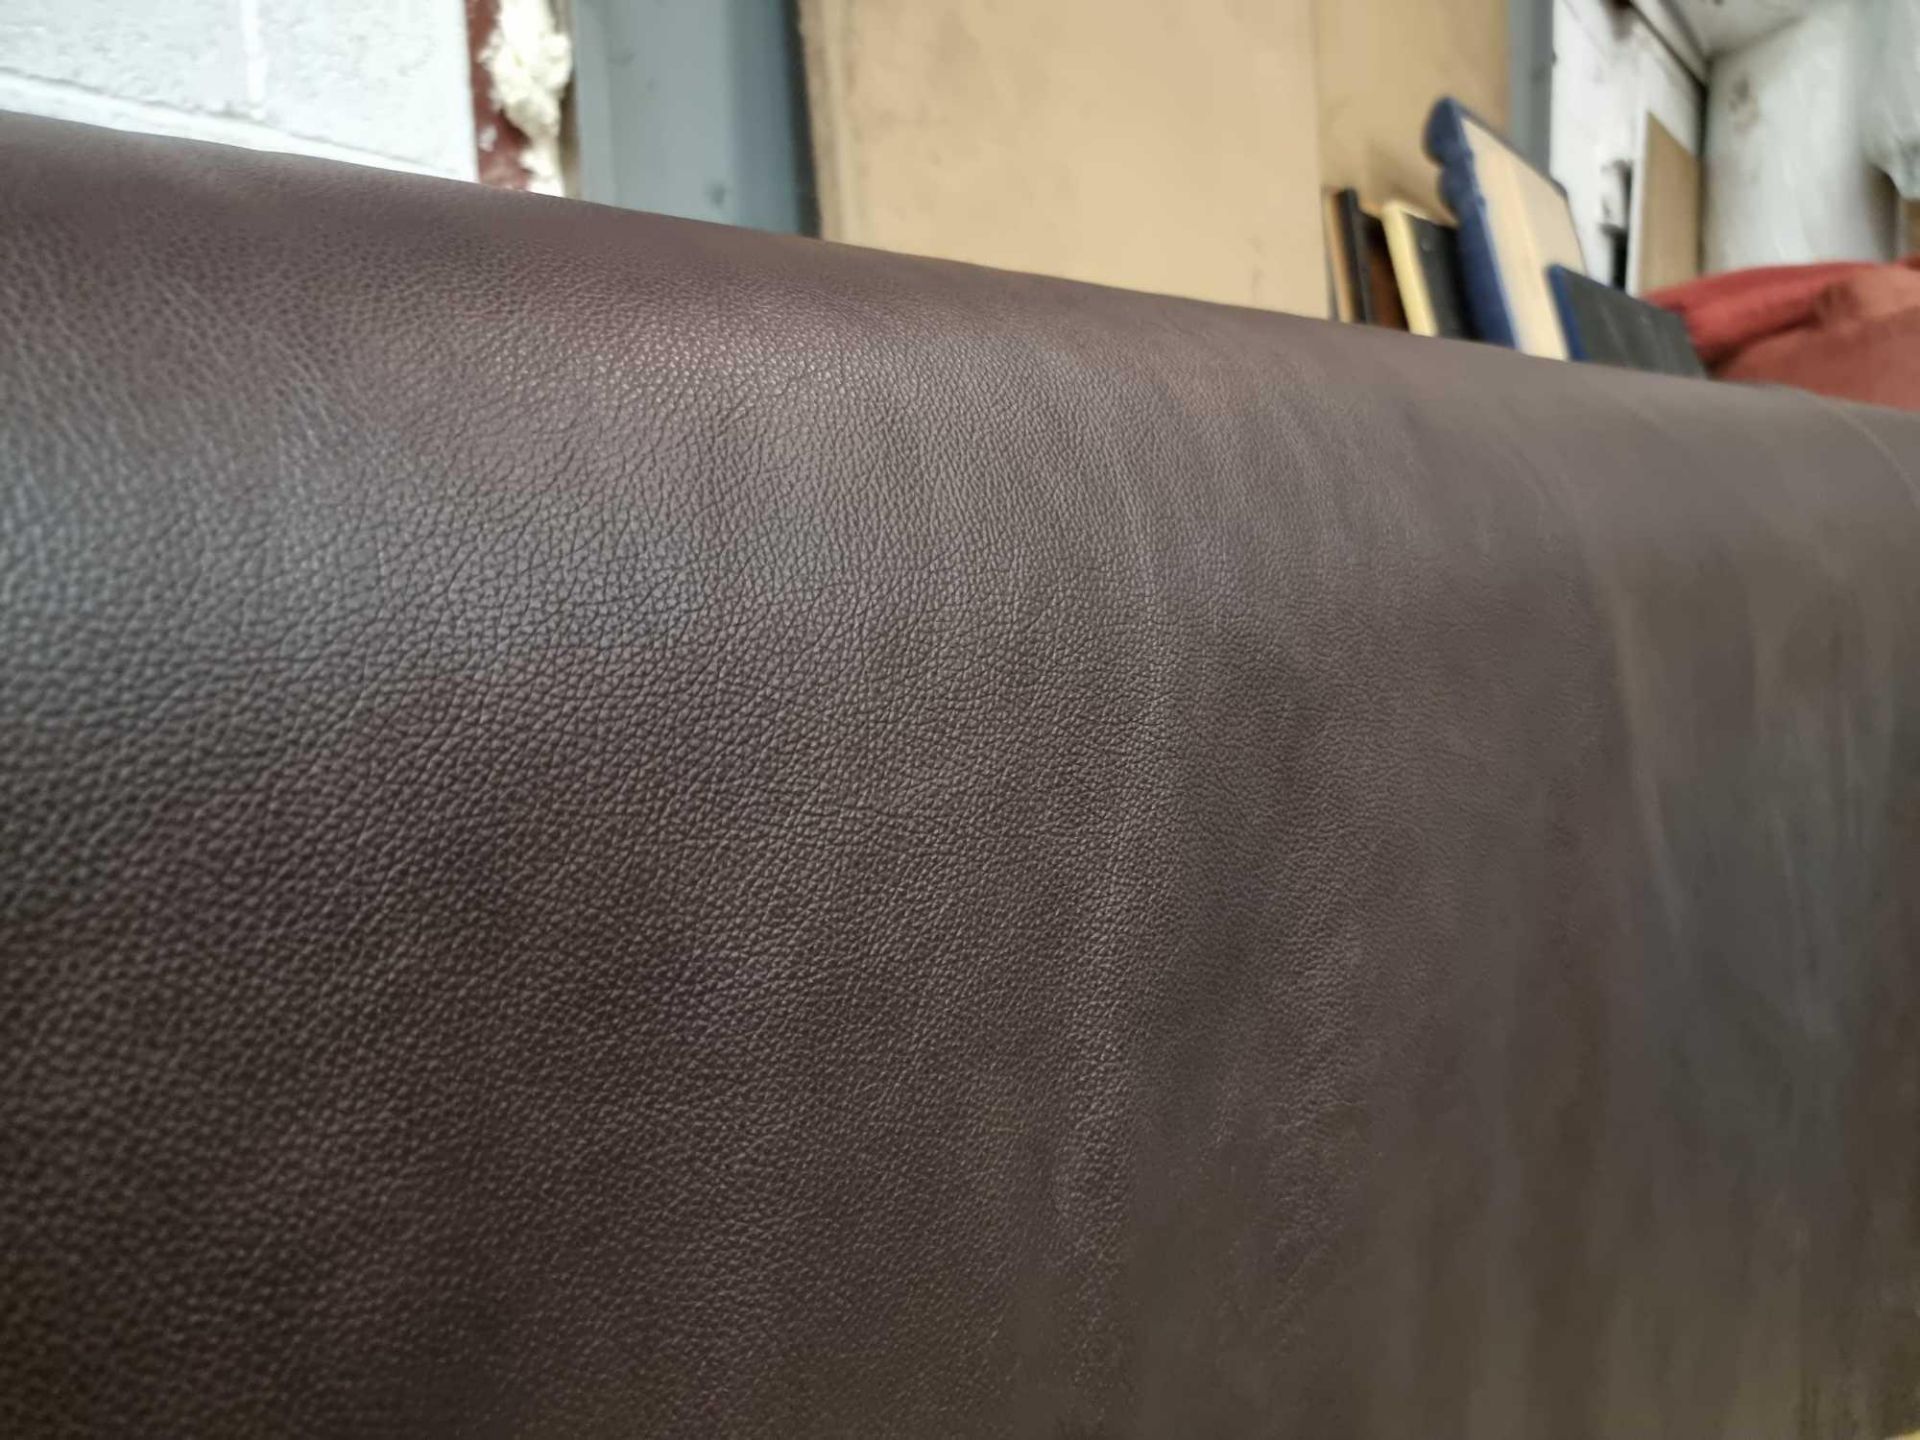 Mastrotto Hudson Chocolate Leather Hide approximately 3.51mÂ² 1.95 x 1.8cm ( Hide No,261)